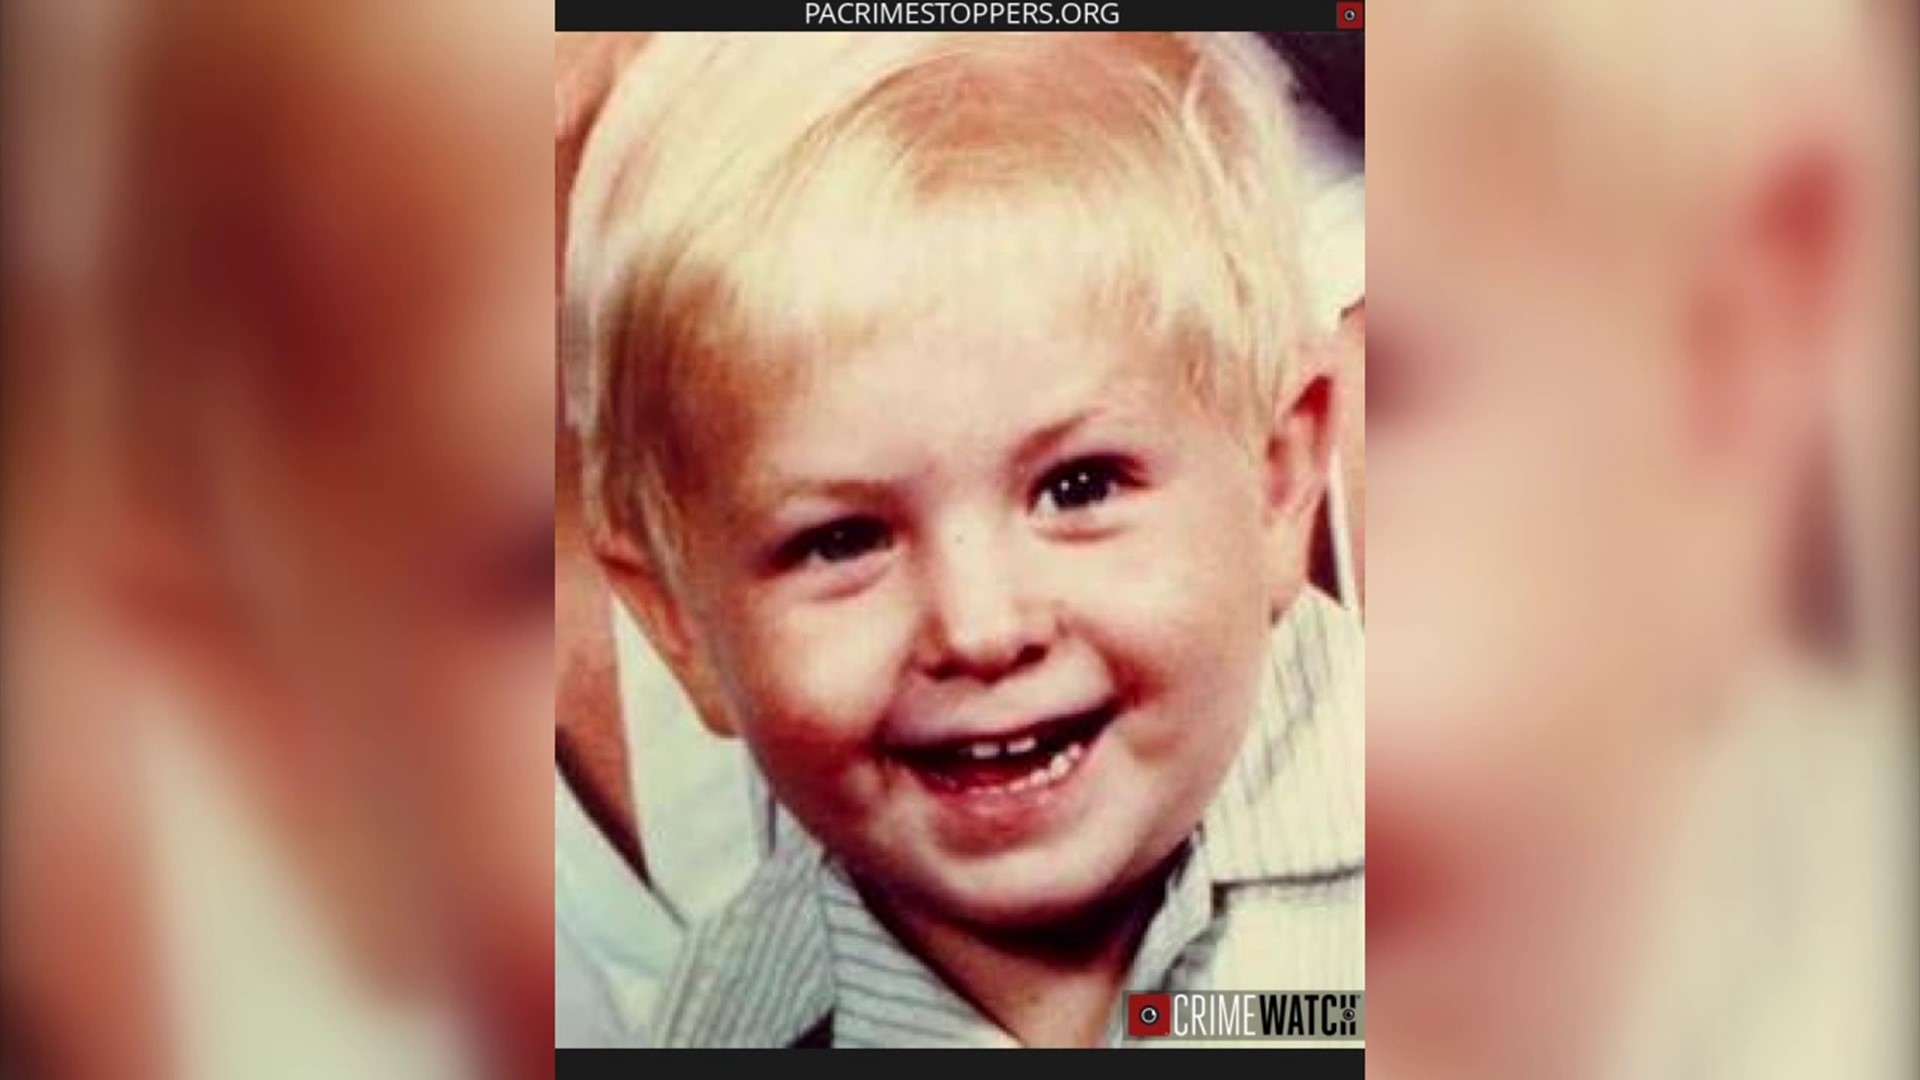 2 year-old Corey Edkin was last seen in 1986, but the first arrest in connection to the case wasn't made until this summer.